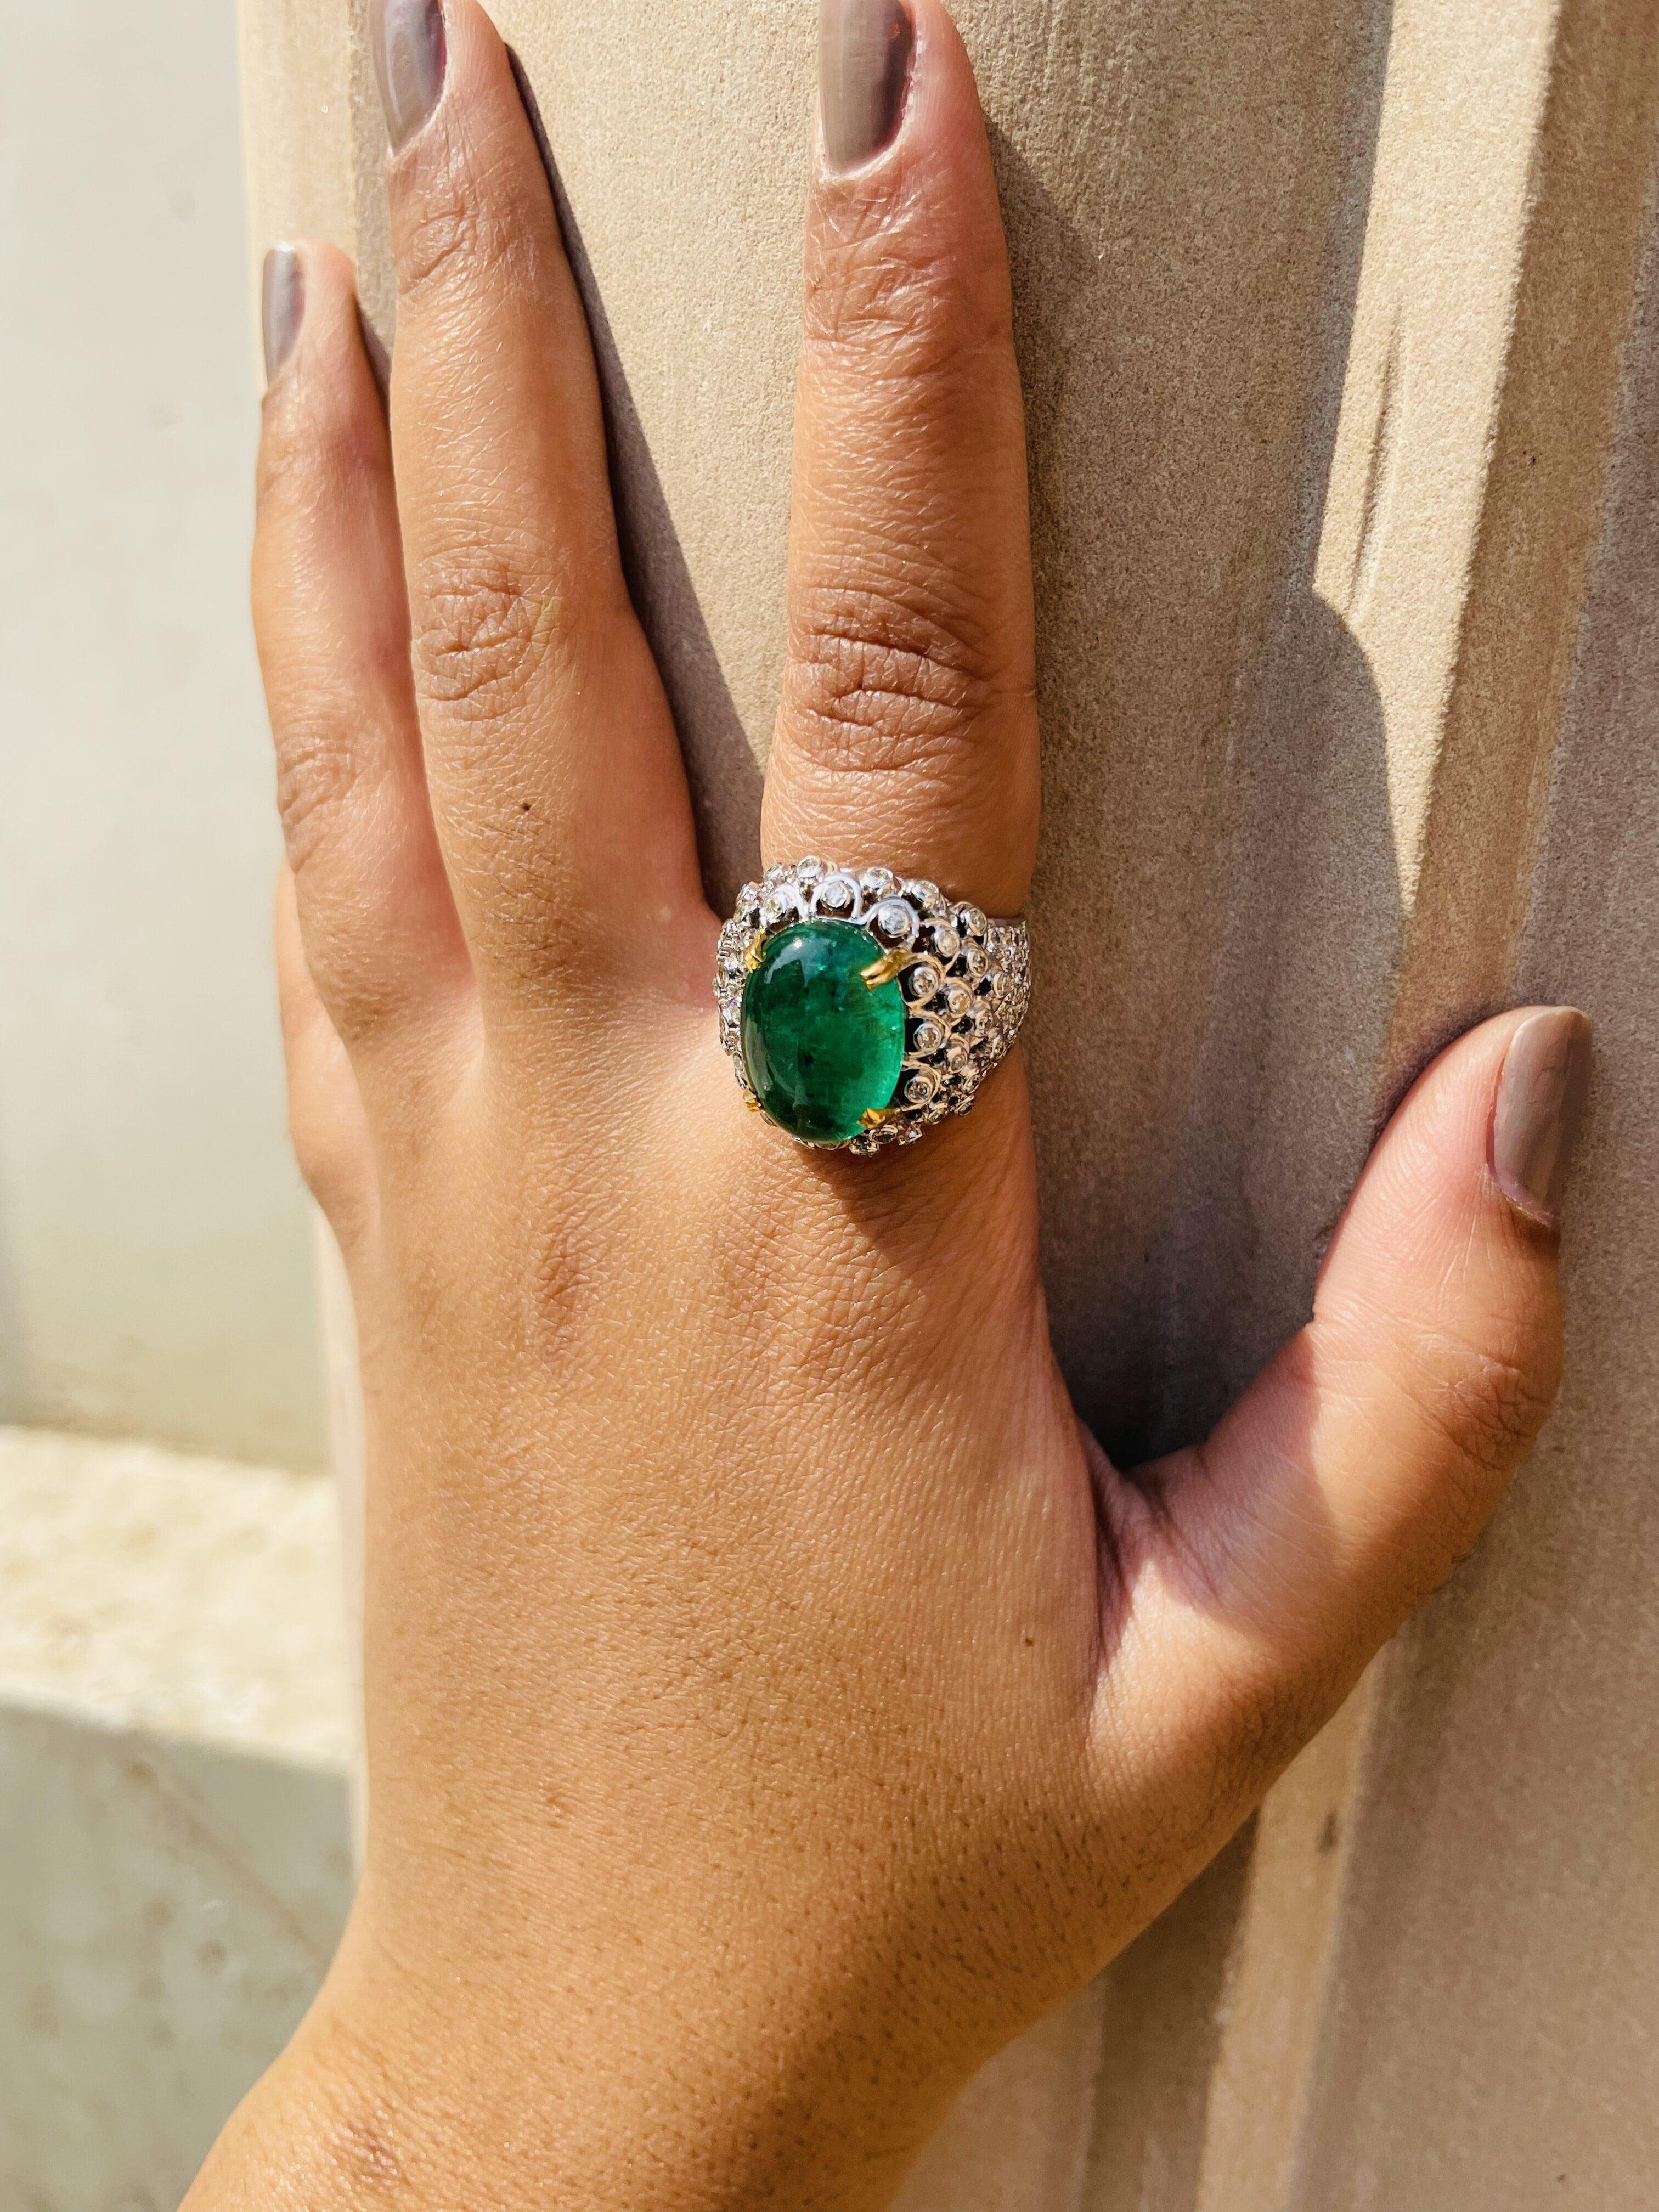 For Sale:  18kt Solid White Gold Estate Emerald Diamond Dome Ring For Women 3